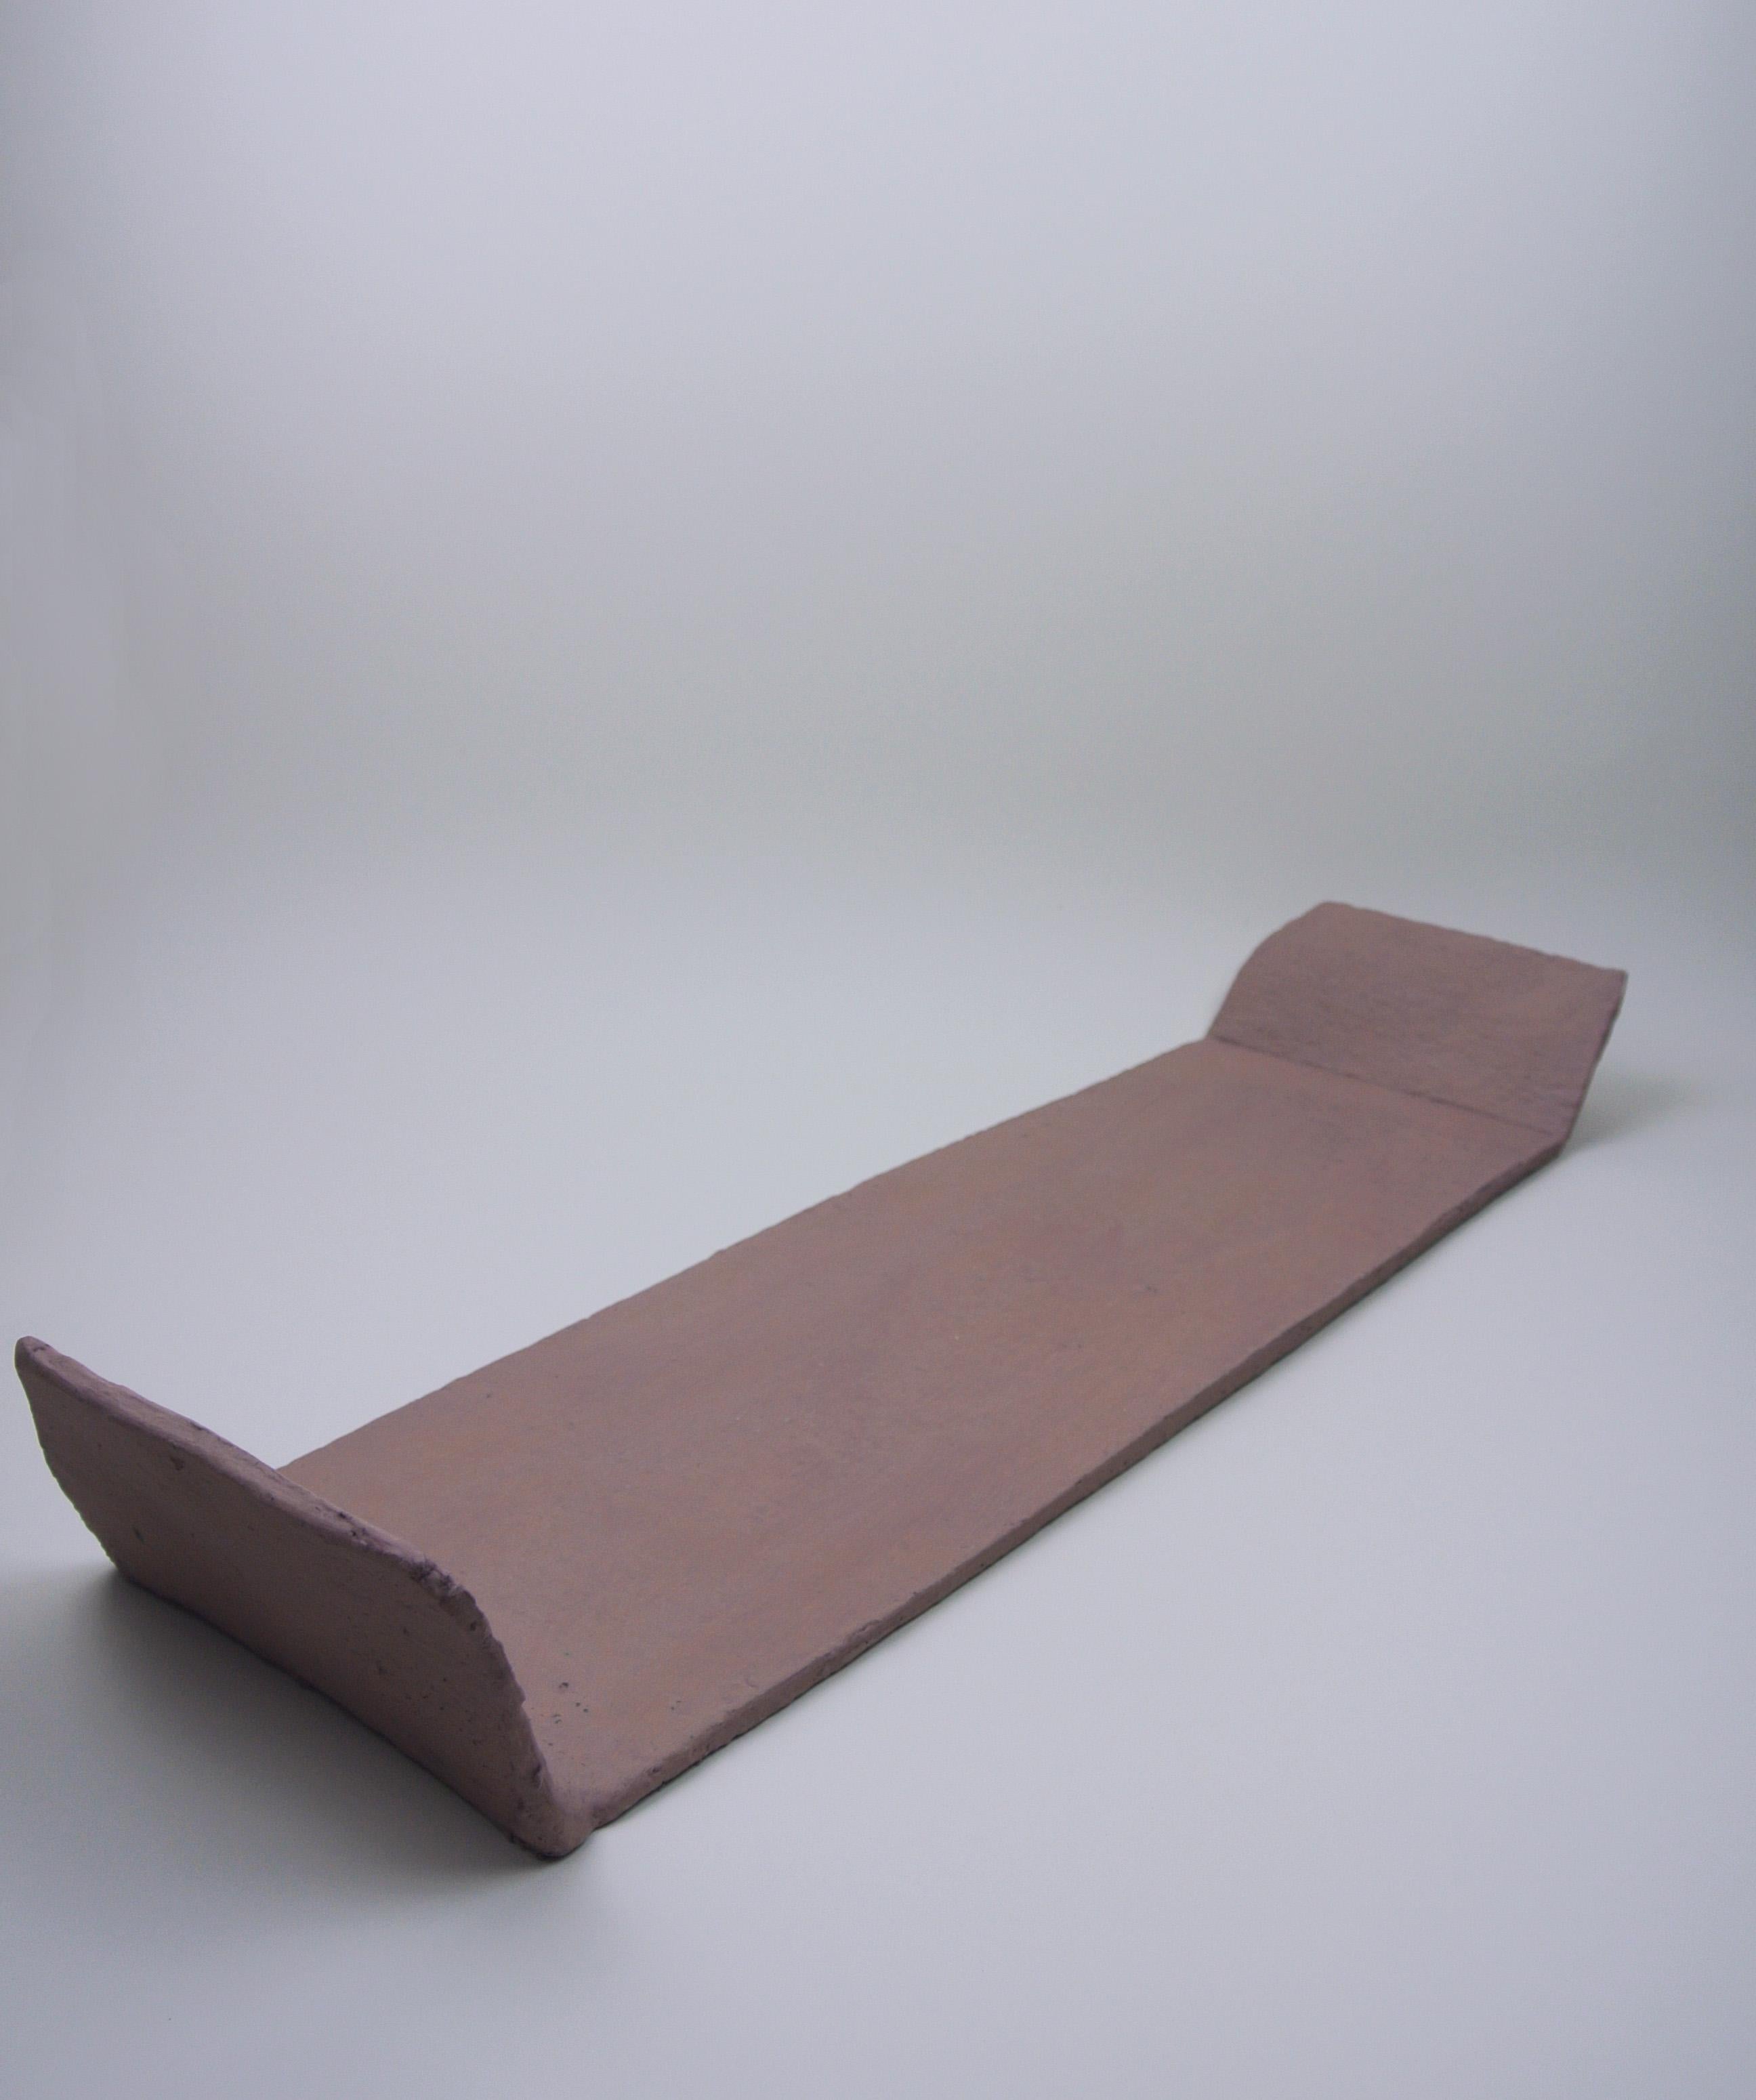 Asymmetric gritty stoneware tray with pale pink engobe.
Fire sand texture and rough surface.